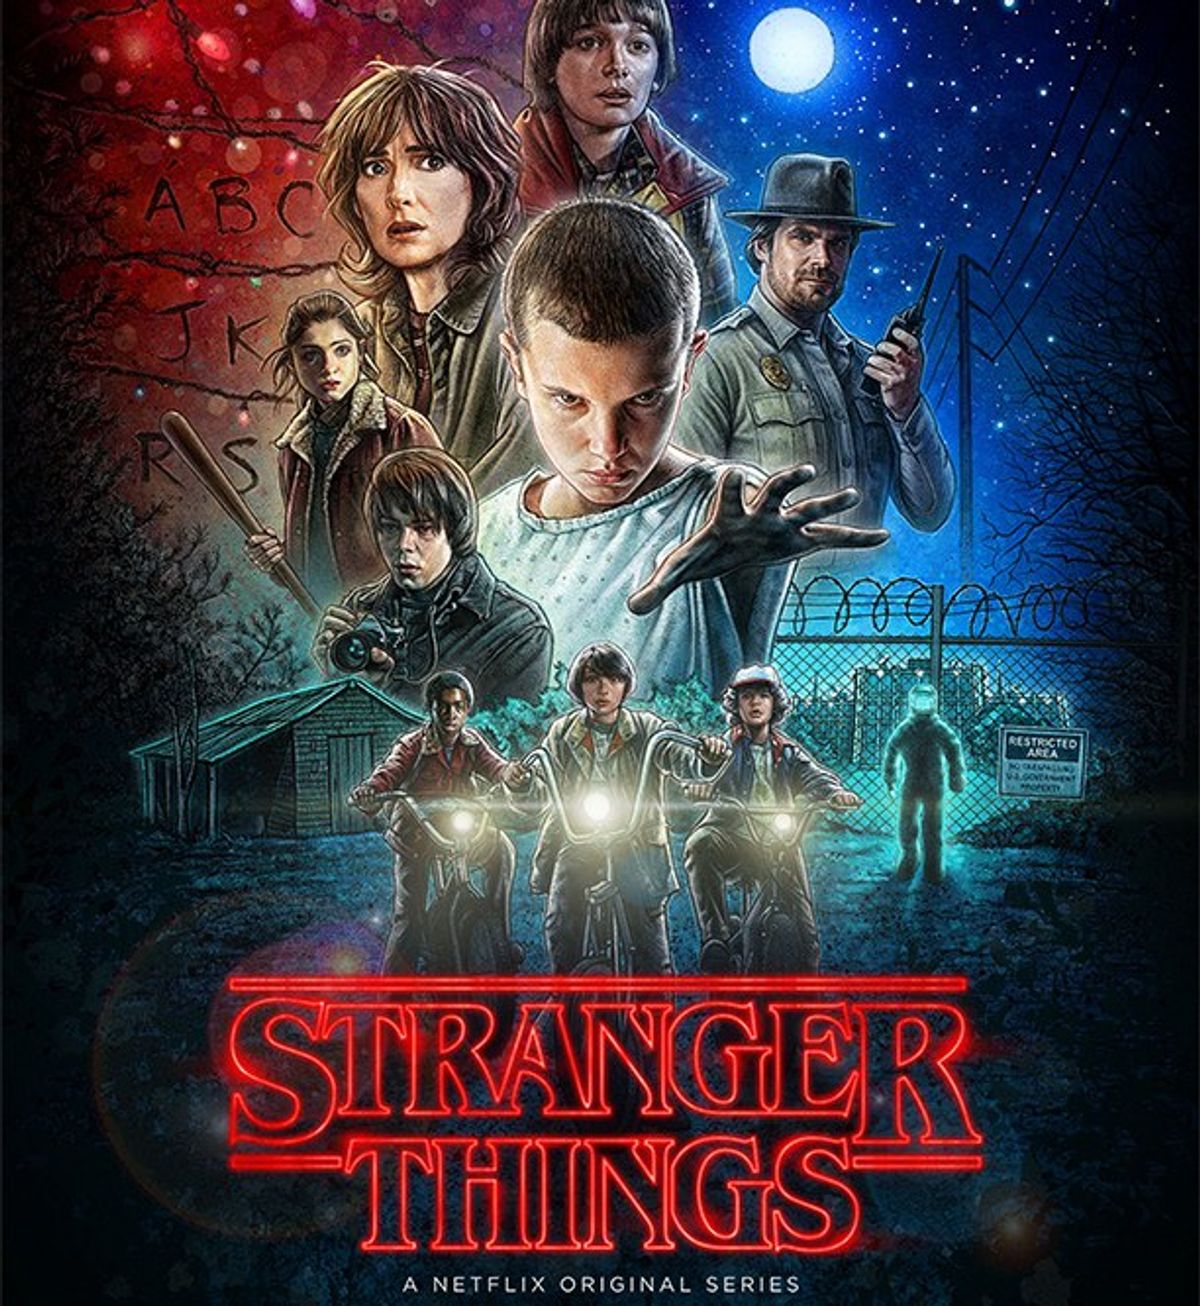 An Indiana Native's Analysis Of "Stranger Things"